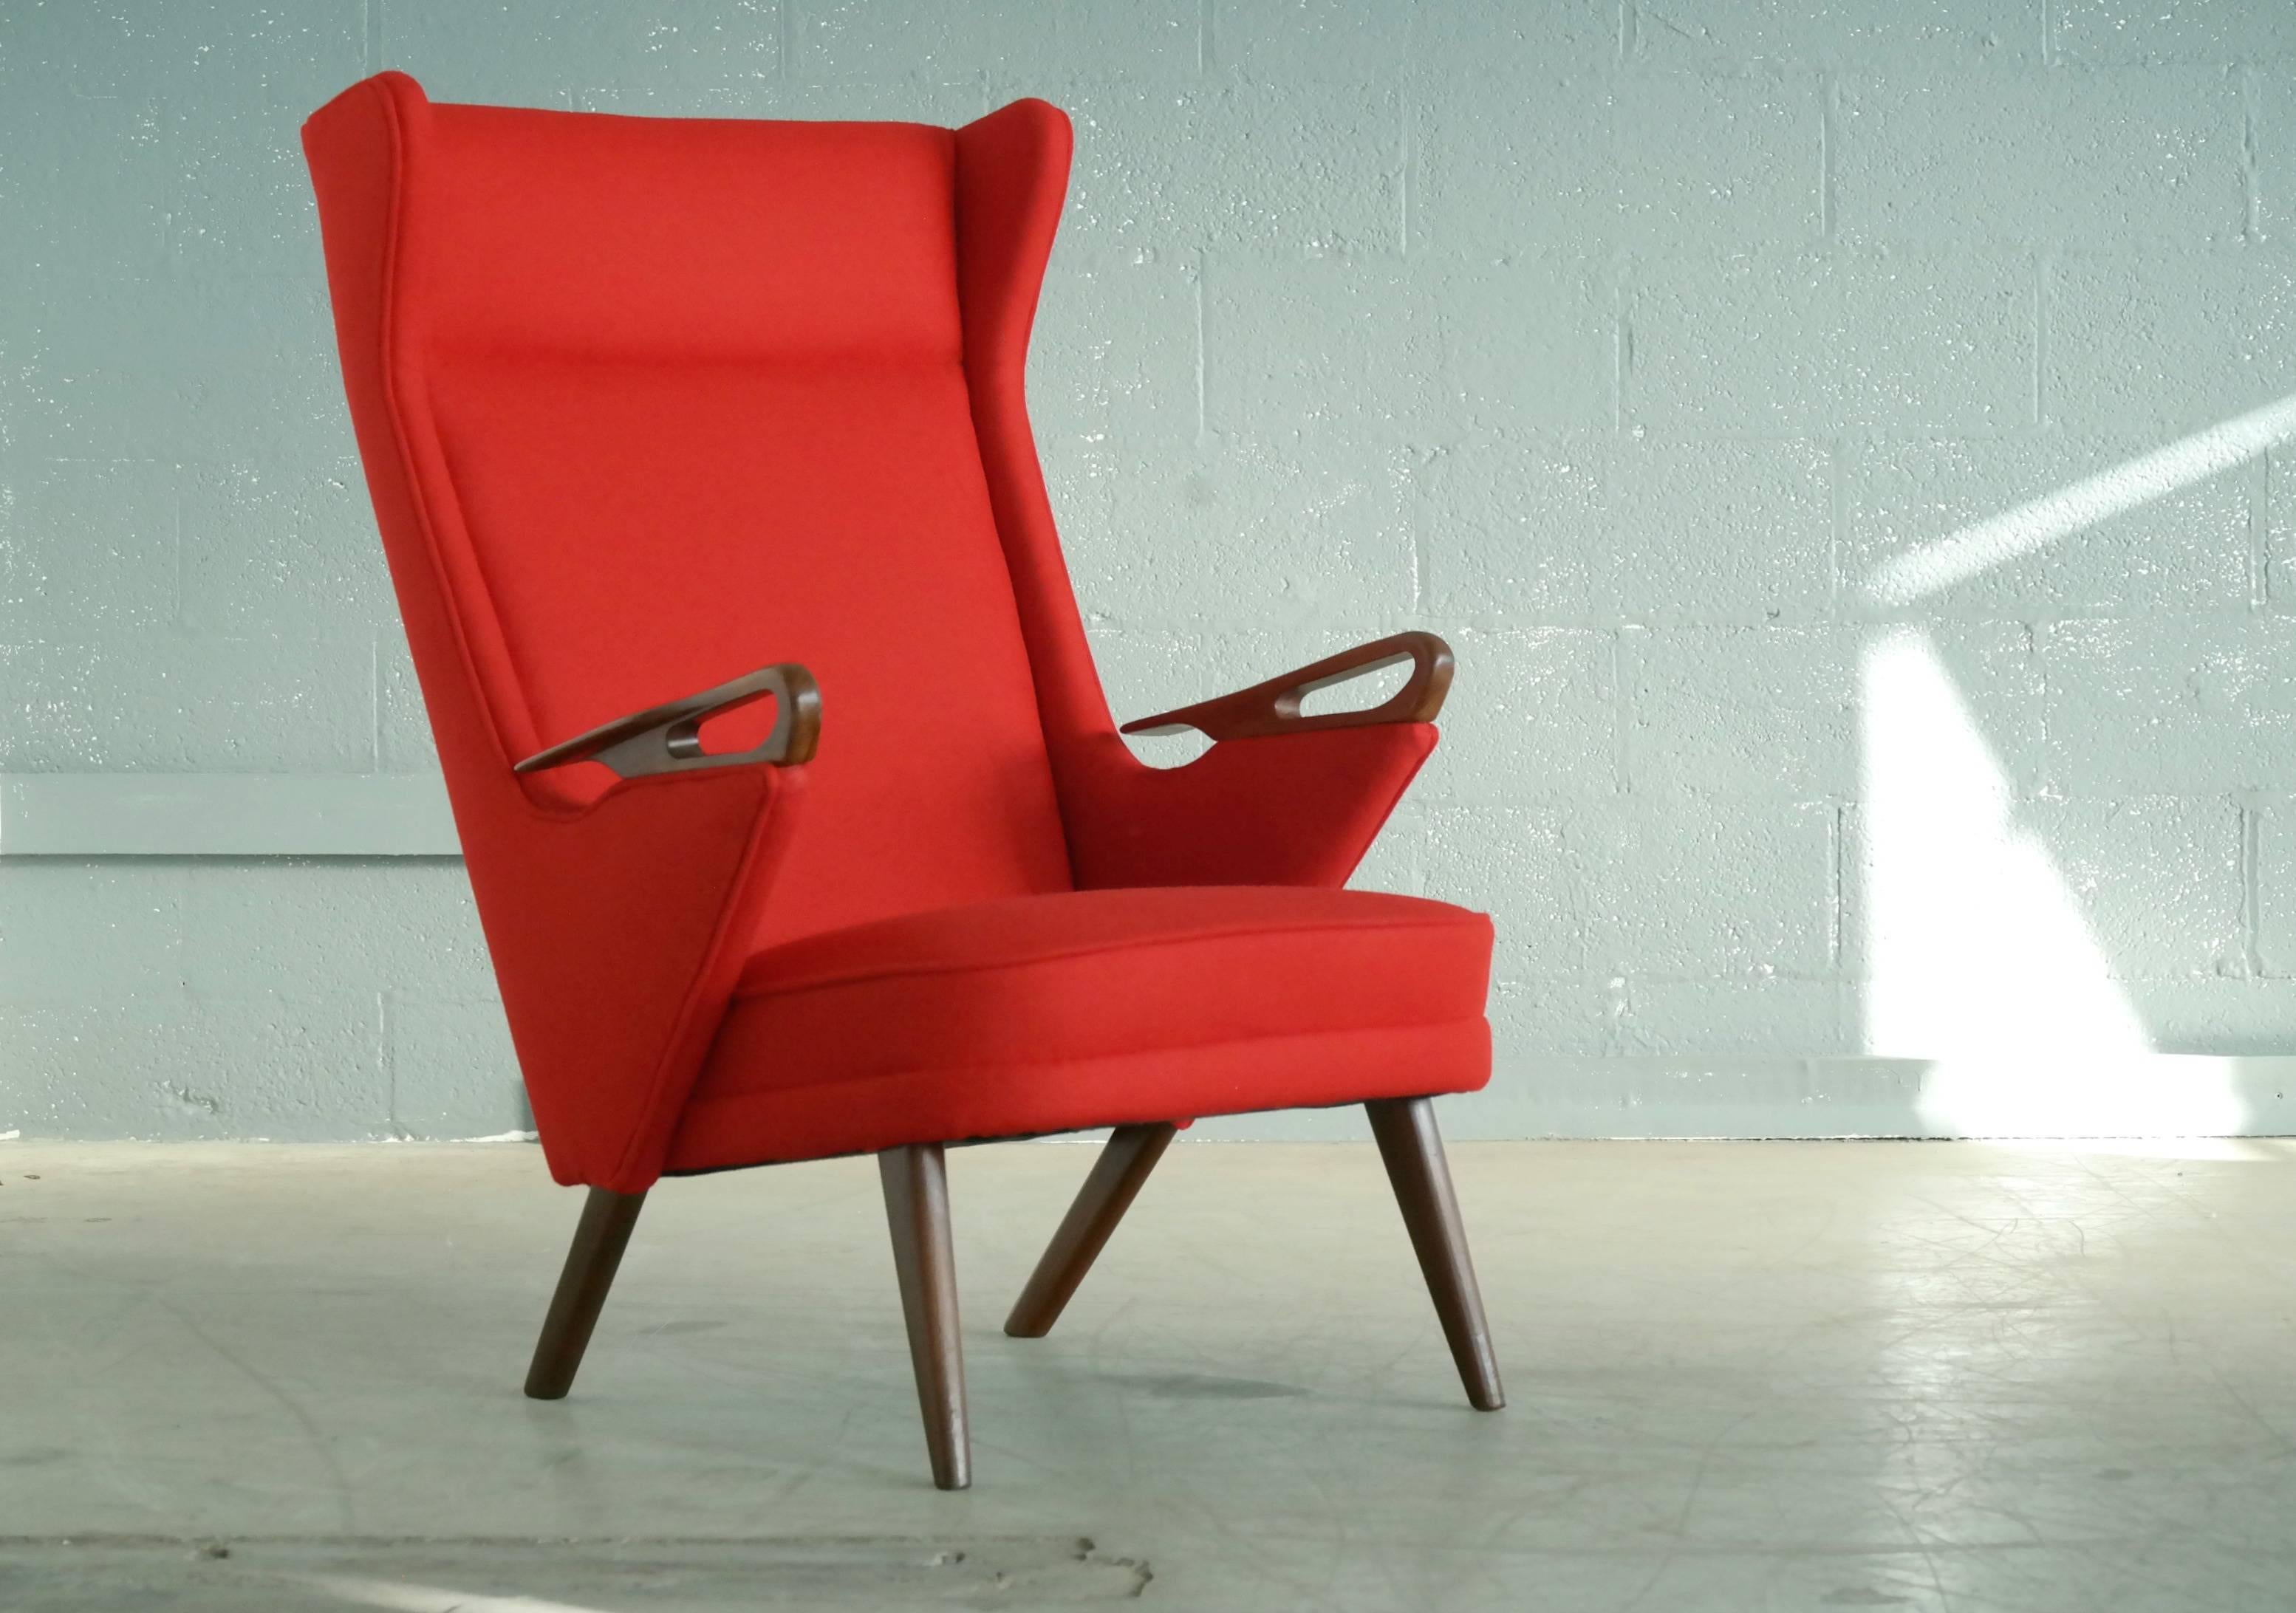 Extremely rare and simply fantastic Svend Skipper attributed 1950s lounge chair in the style of Hans Wegner's and Svend Skipper's own Papa Bear lounge chairs. While this chair share some of the same straight lines and stance as Wegner's Papa Bear